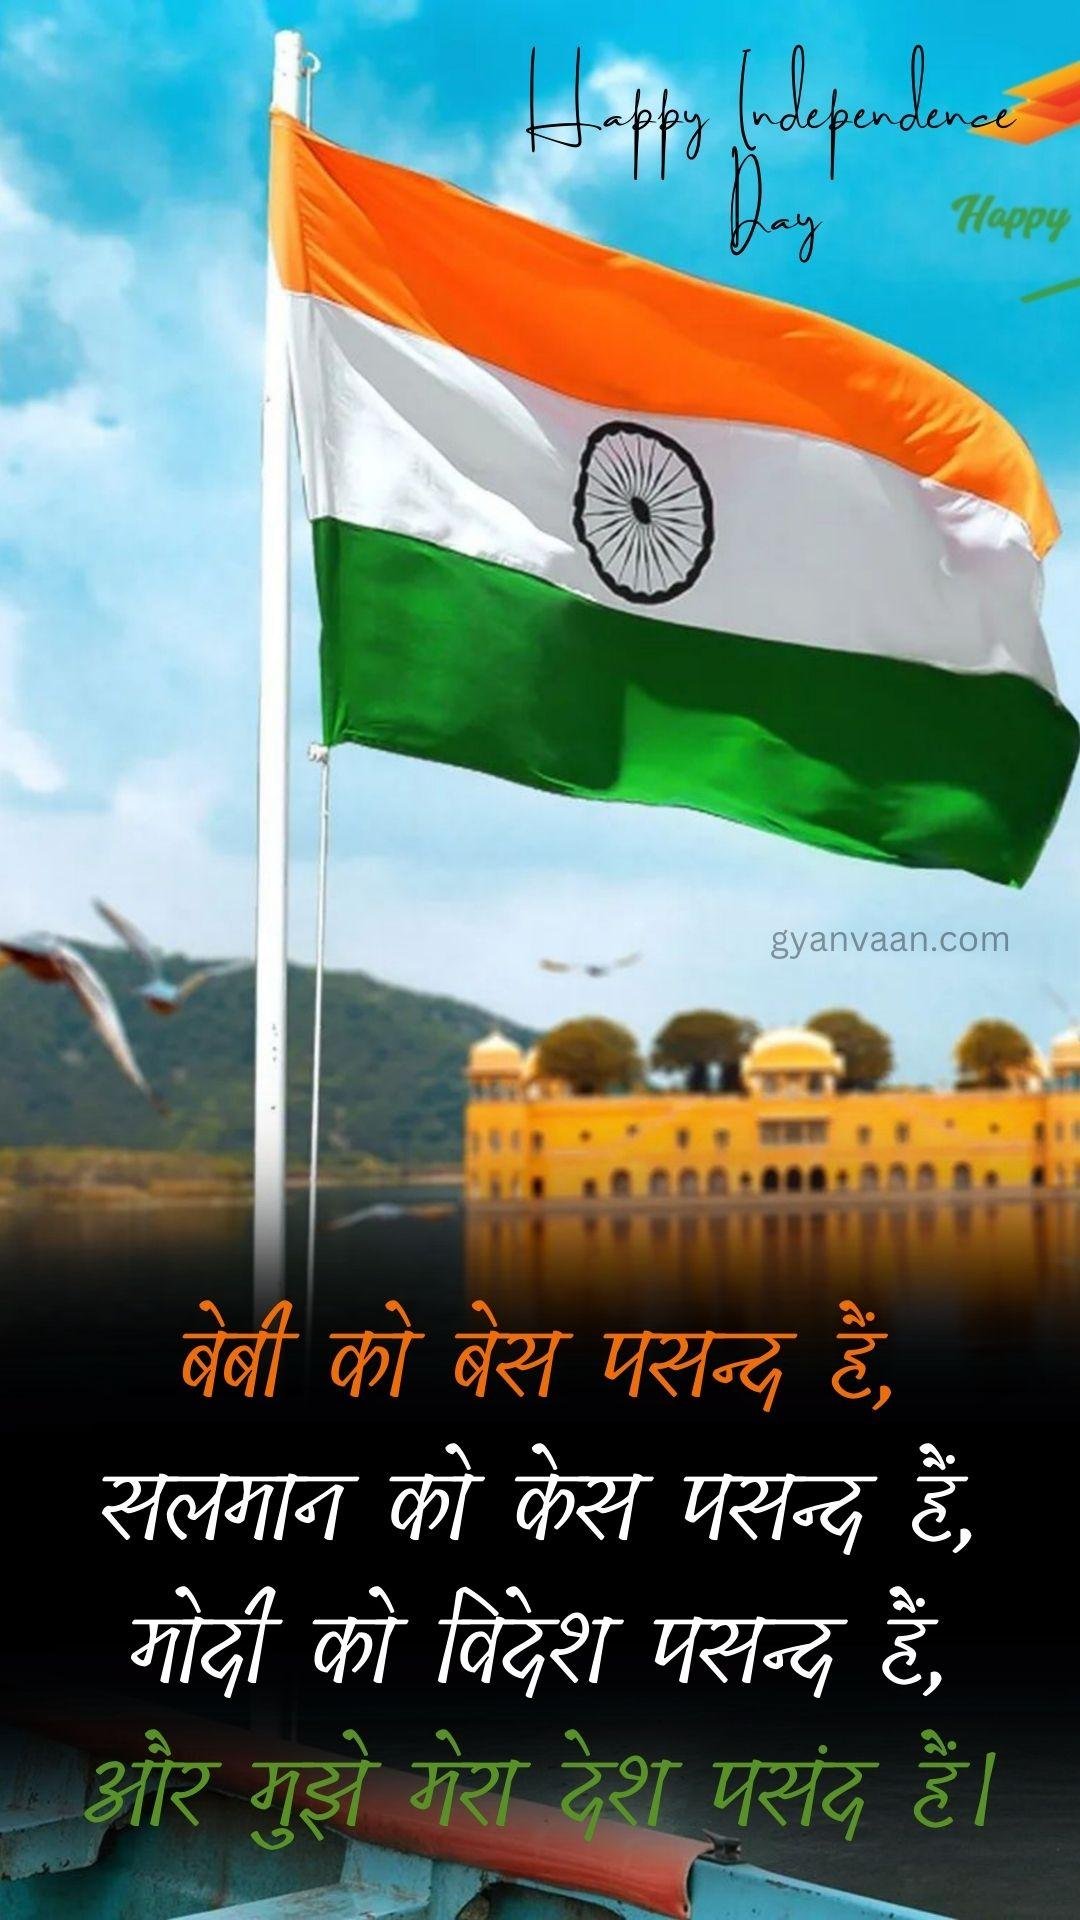 Independence Day Quotes In Hindi With Shayari Slogan Wishes For Whatsapp Status Mobile 12 - Independence Day Quotes In Hindi